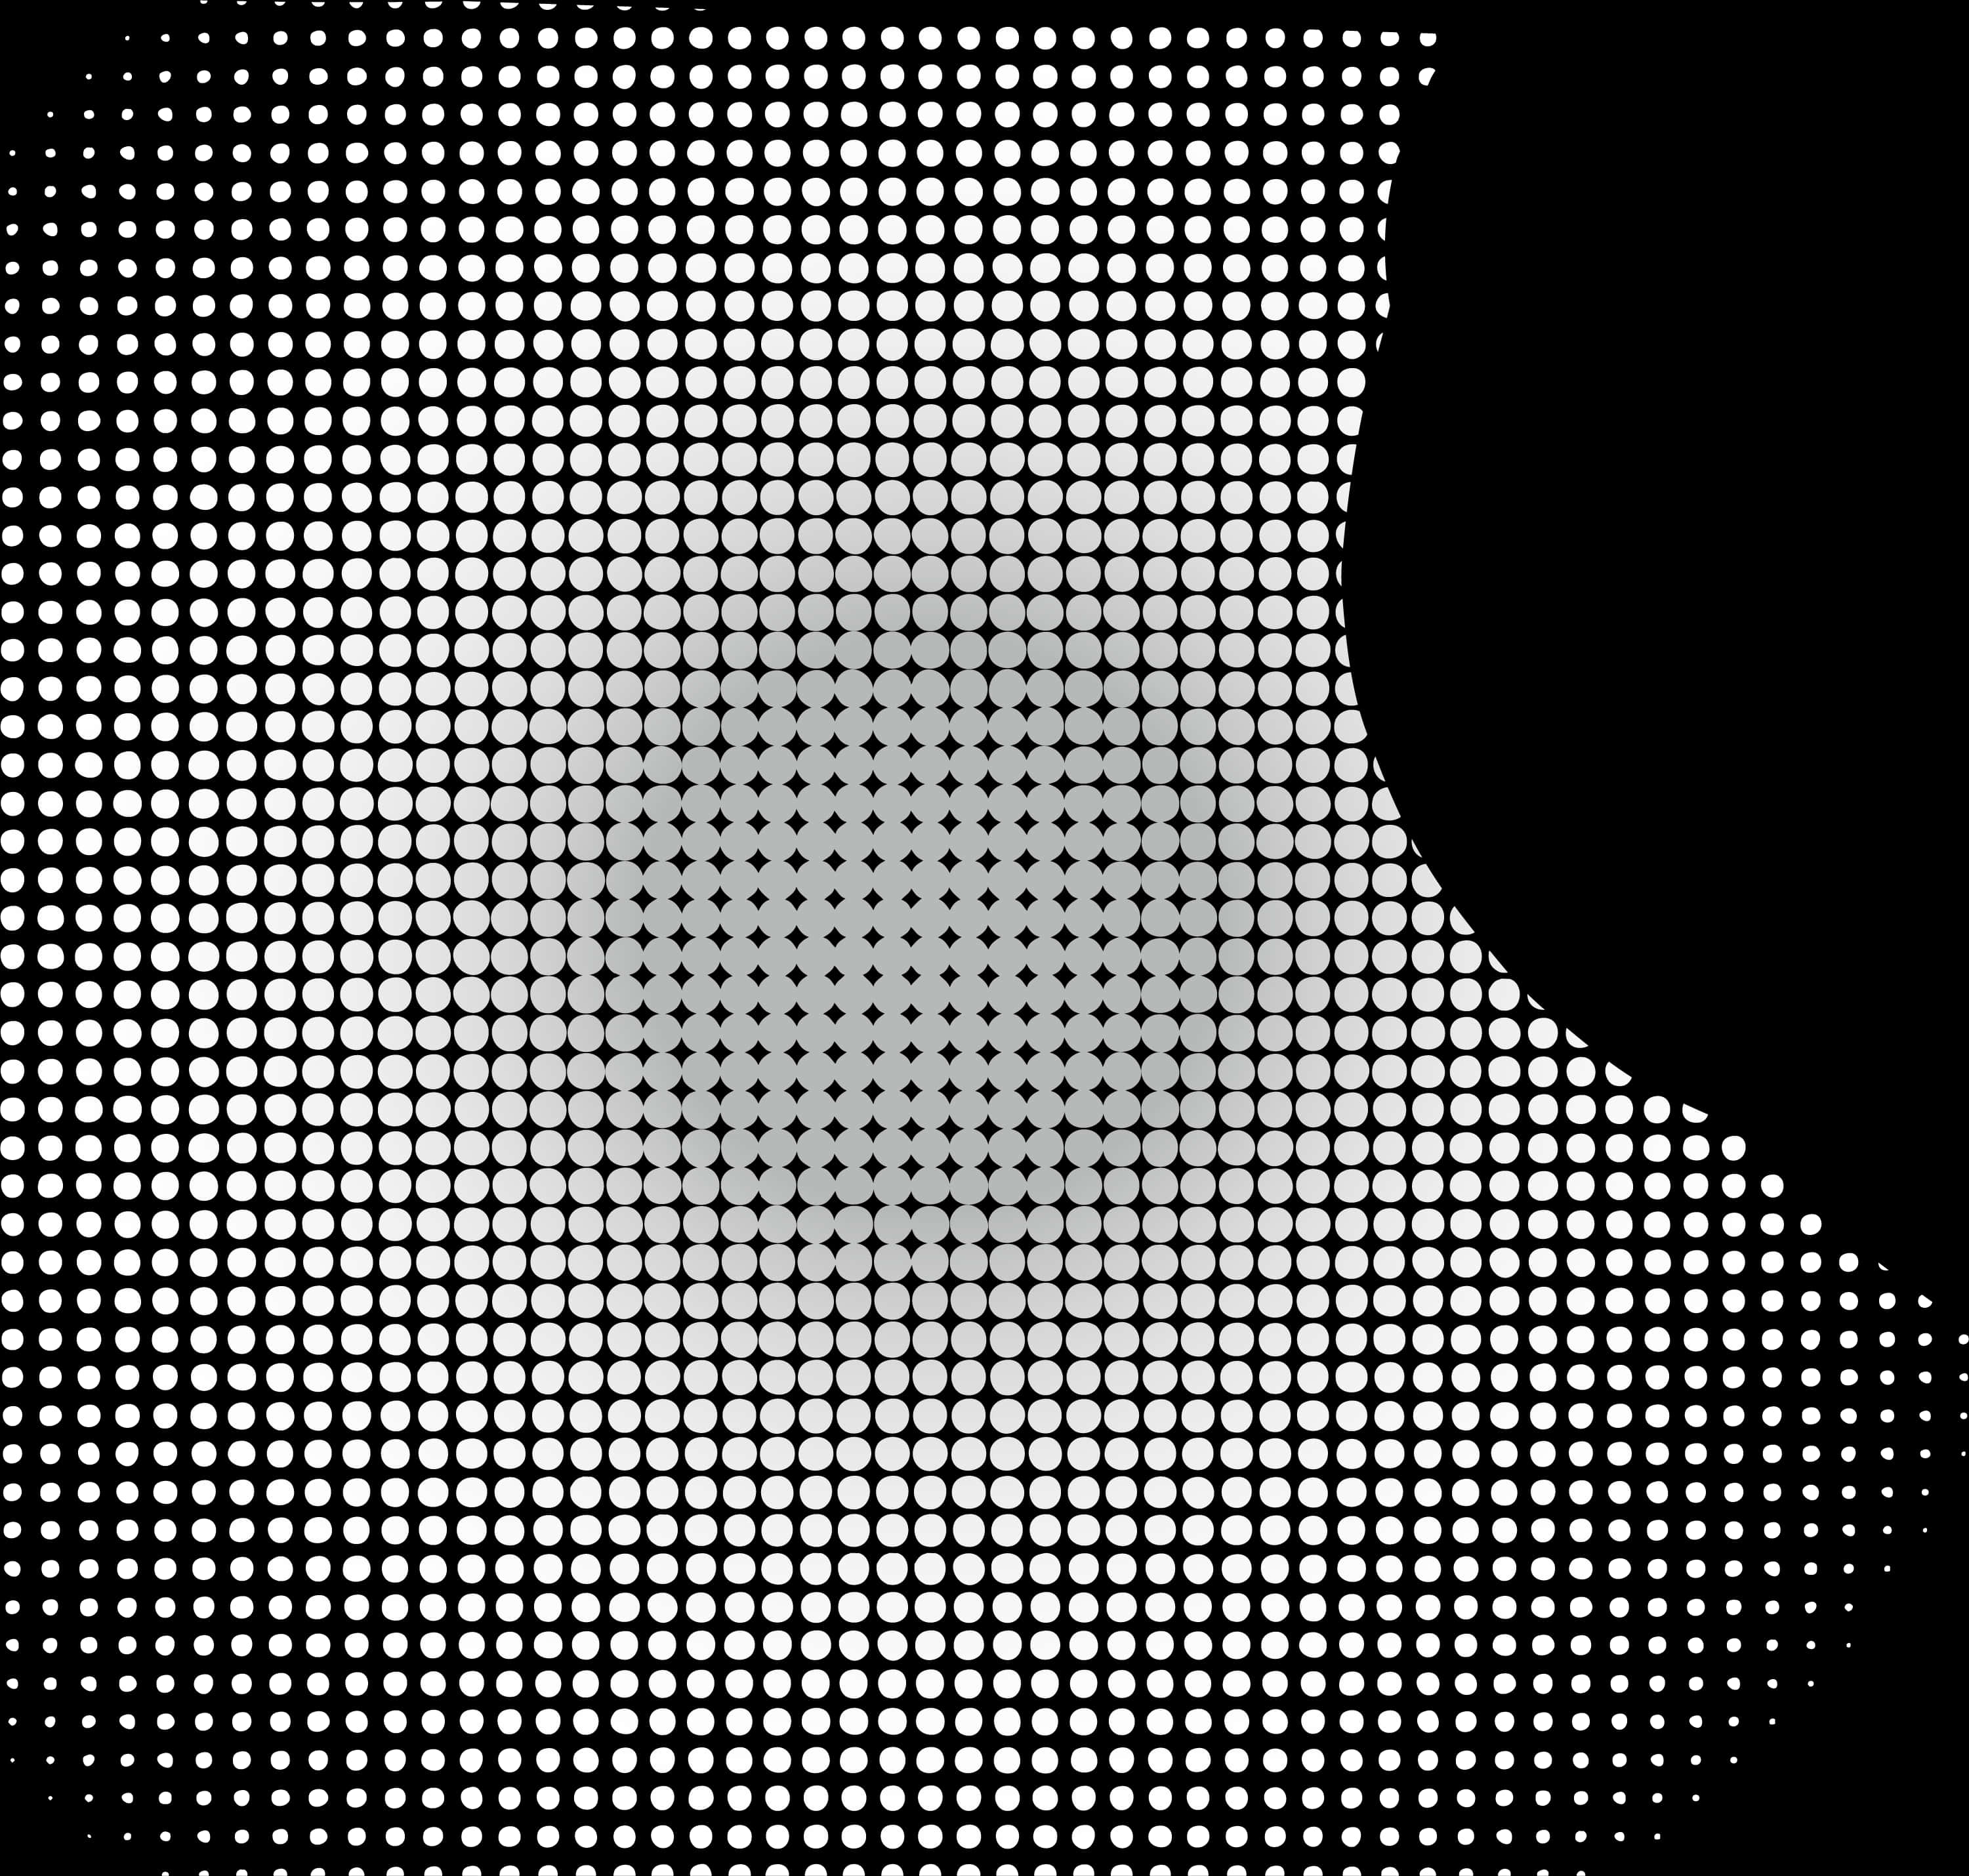 A Halftone Of A Person's Face